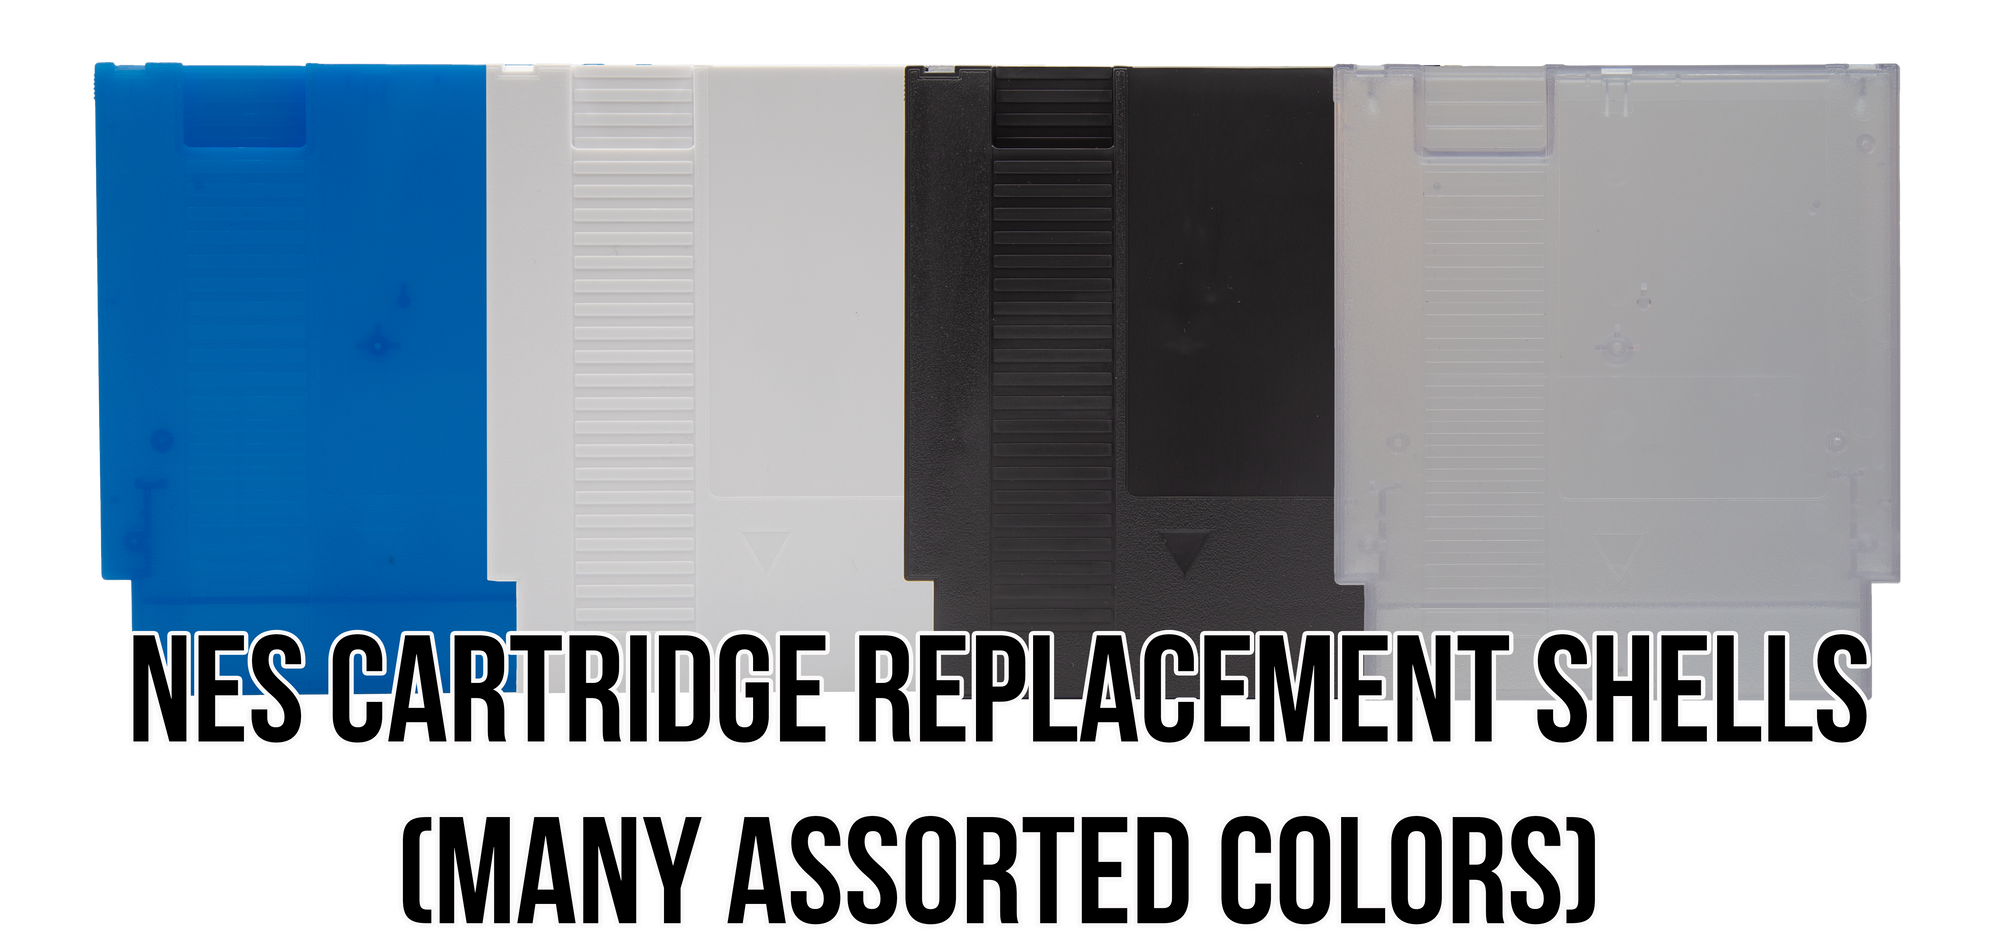 retrotainment nes replacement shells